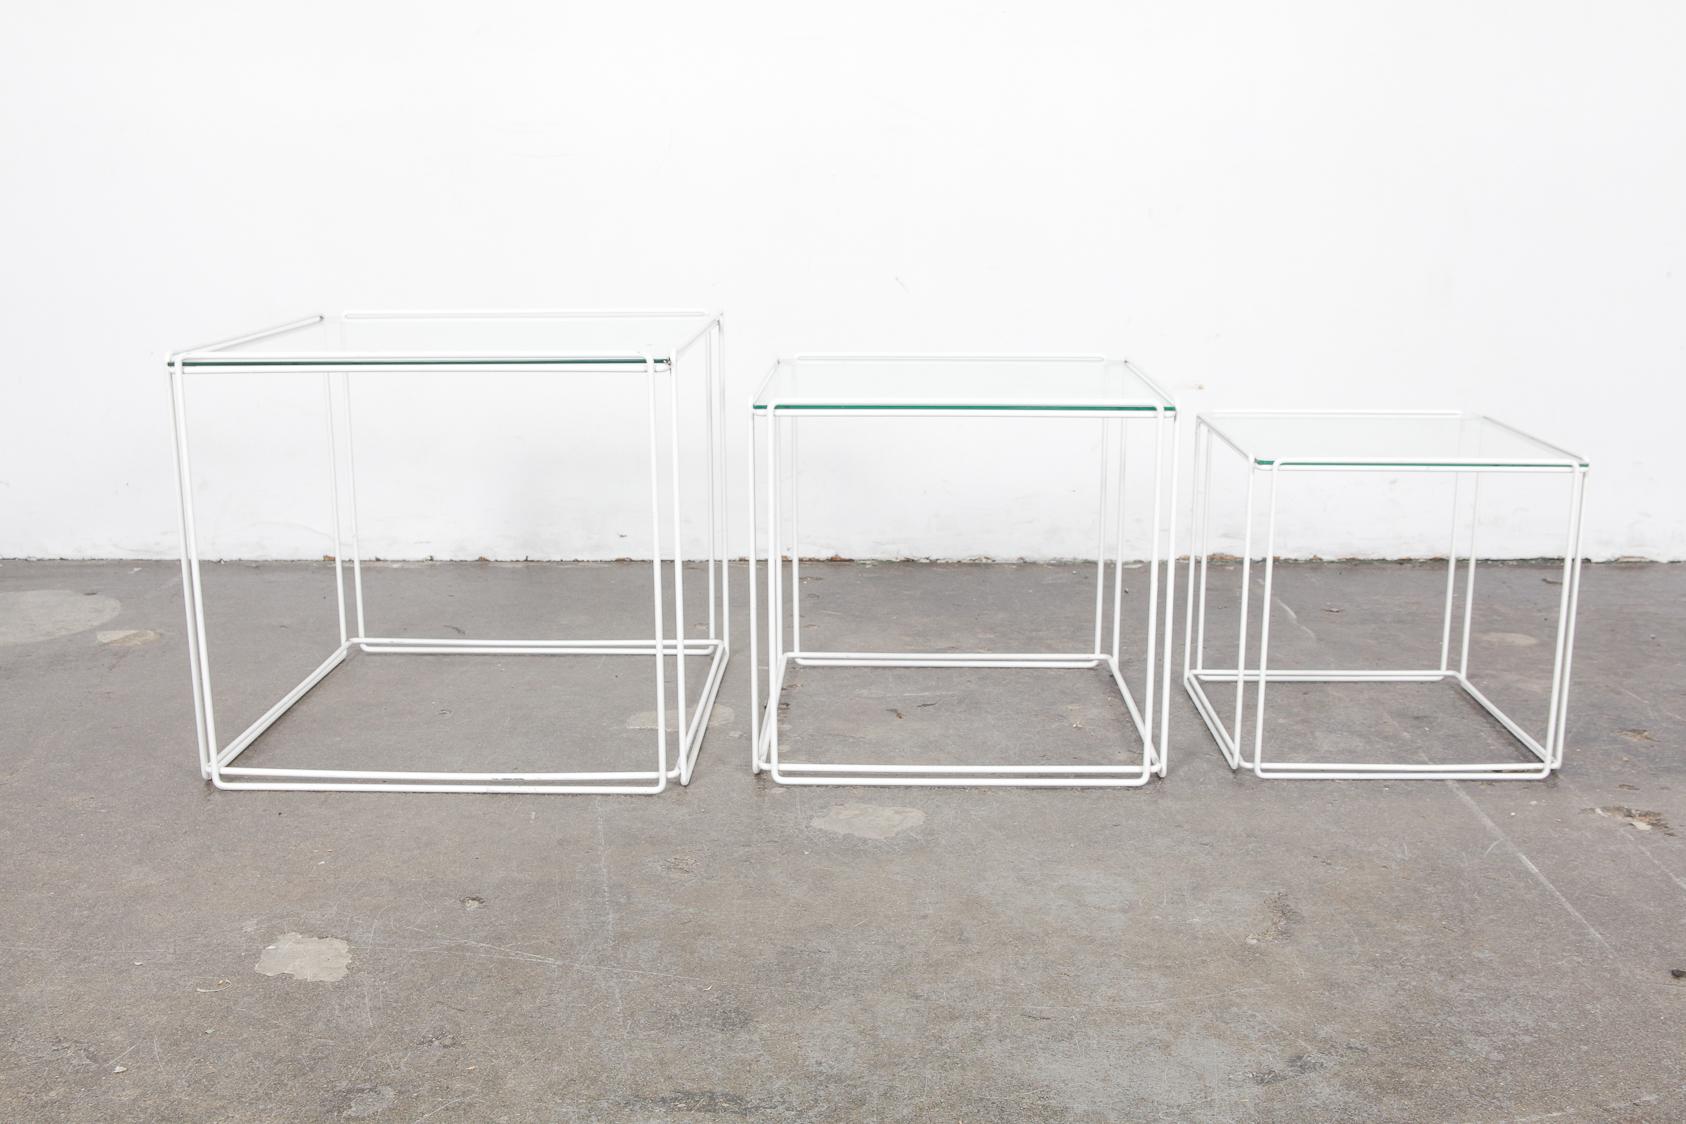 Set of white metal 'Isoceles' glass top nesting tables designed by Max Sauze, a french Industrial designer known for his metal lightning designs and furniture, 1970s. Produced by Arrow, France.

Small size: 12